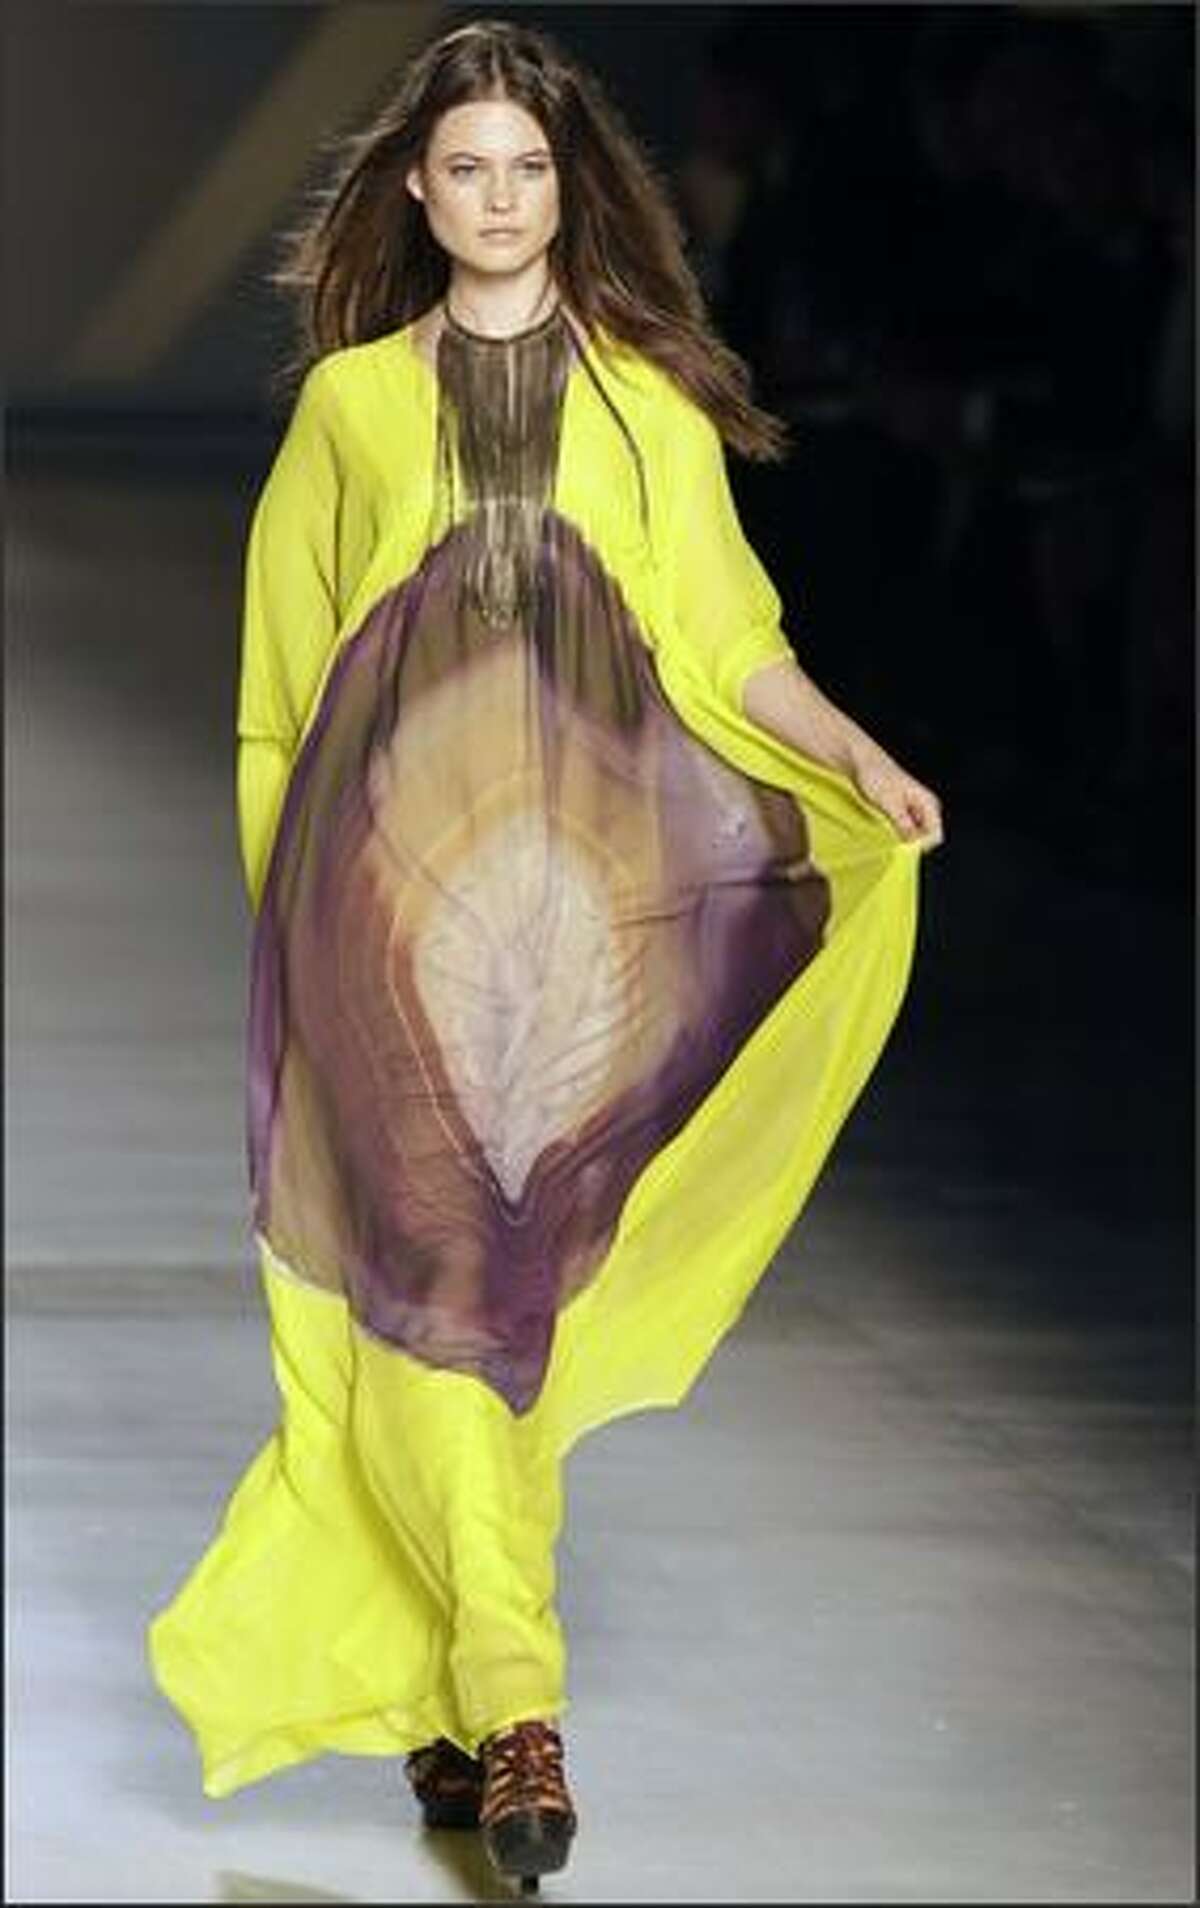 A model presents a creation by Italian designer Veronica Etro during the spring/summer 2008 collections of the Milan ready-to-wear fashion shows.